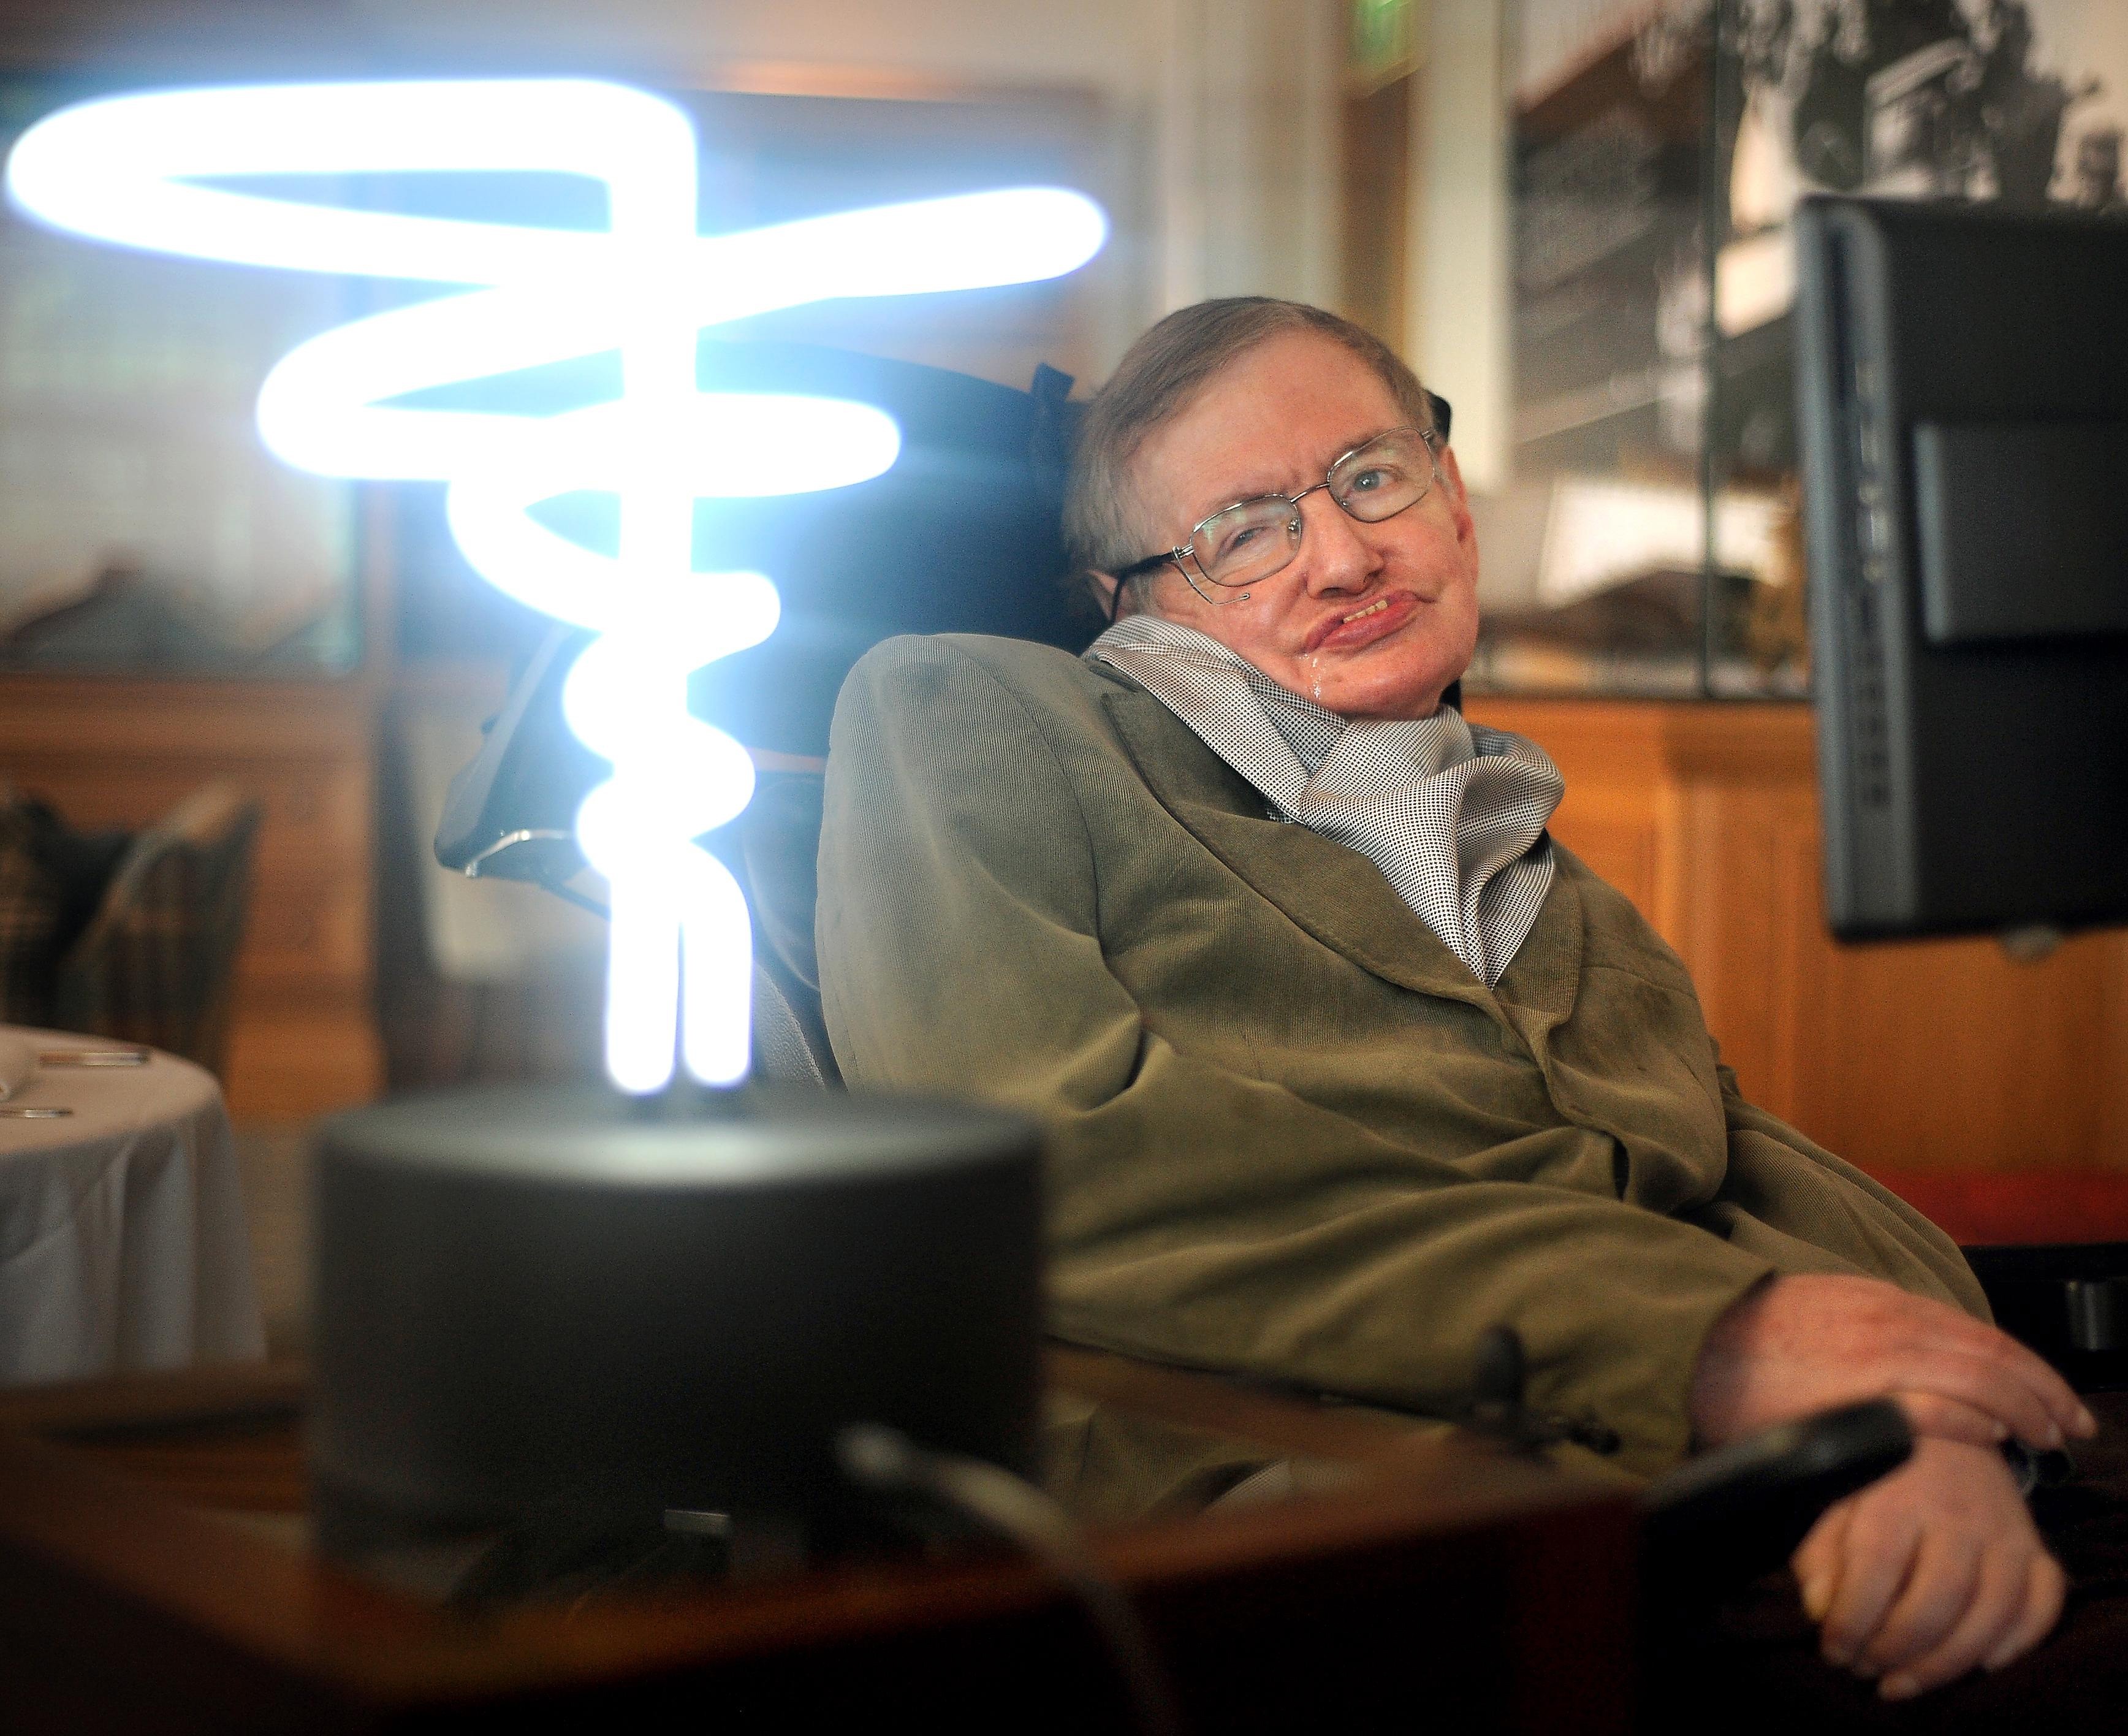 In this February 25, 2012 photo, Professor Stephen Hawking poses beside a lamp titled “black hole light” by inventor Mark Champkins, presented to him during his visit to the Science Museum in London. Photo: AP